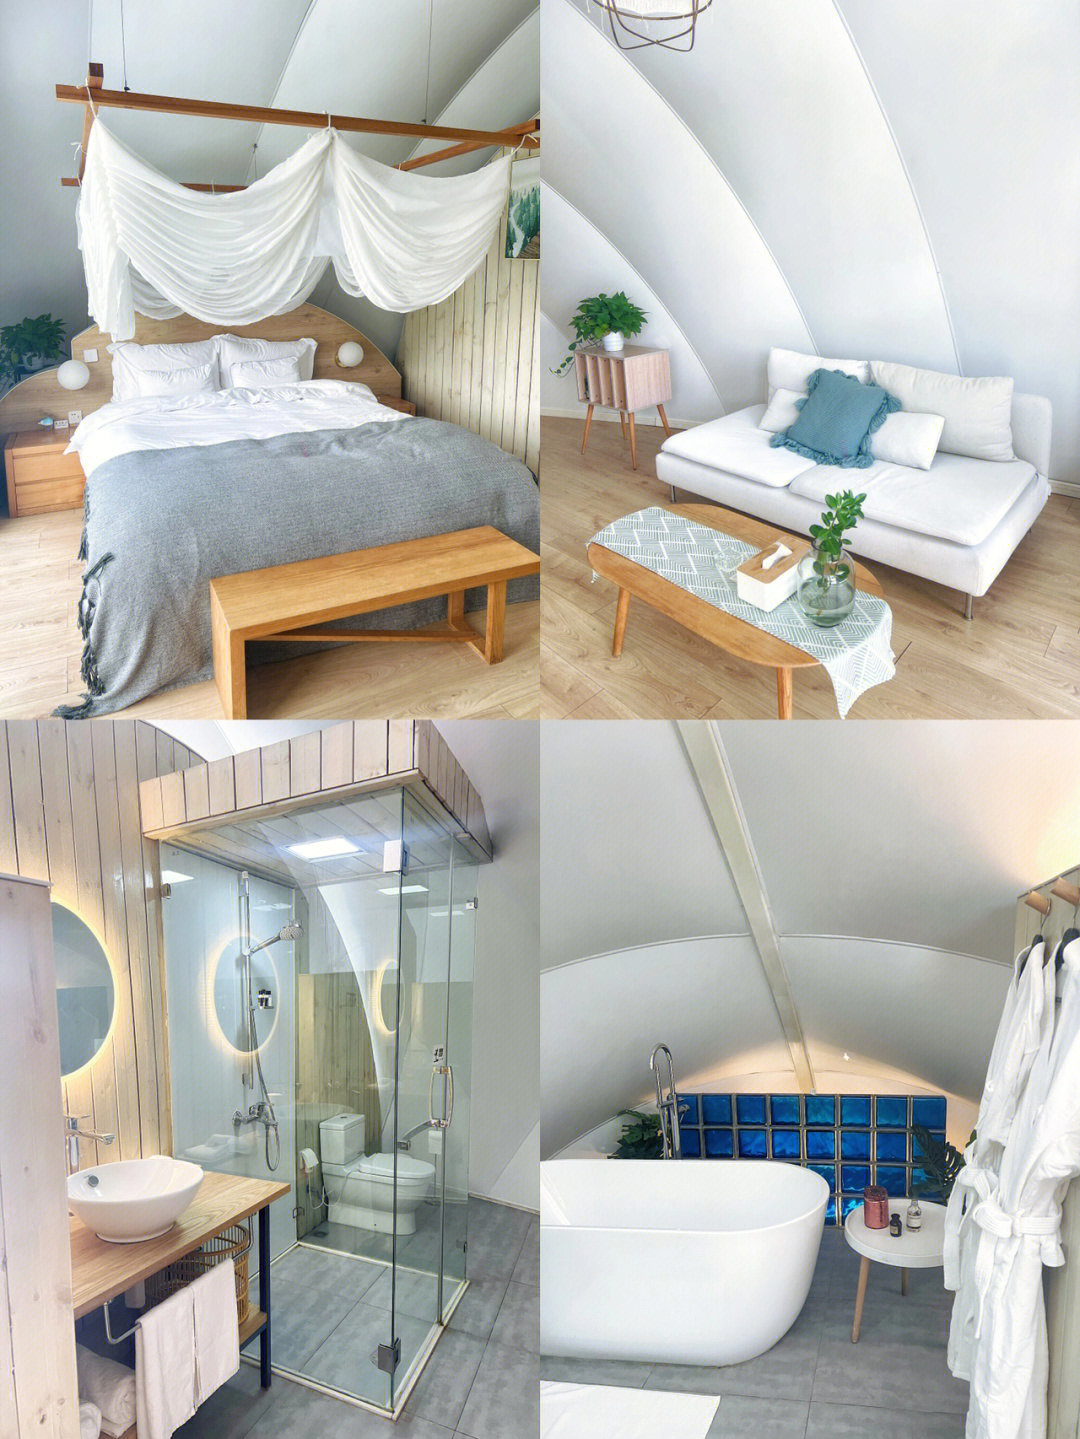 Luxury glamping shell hotel tent interior space with bathroom